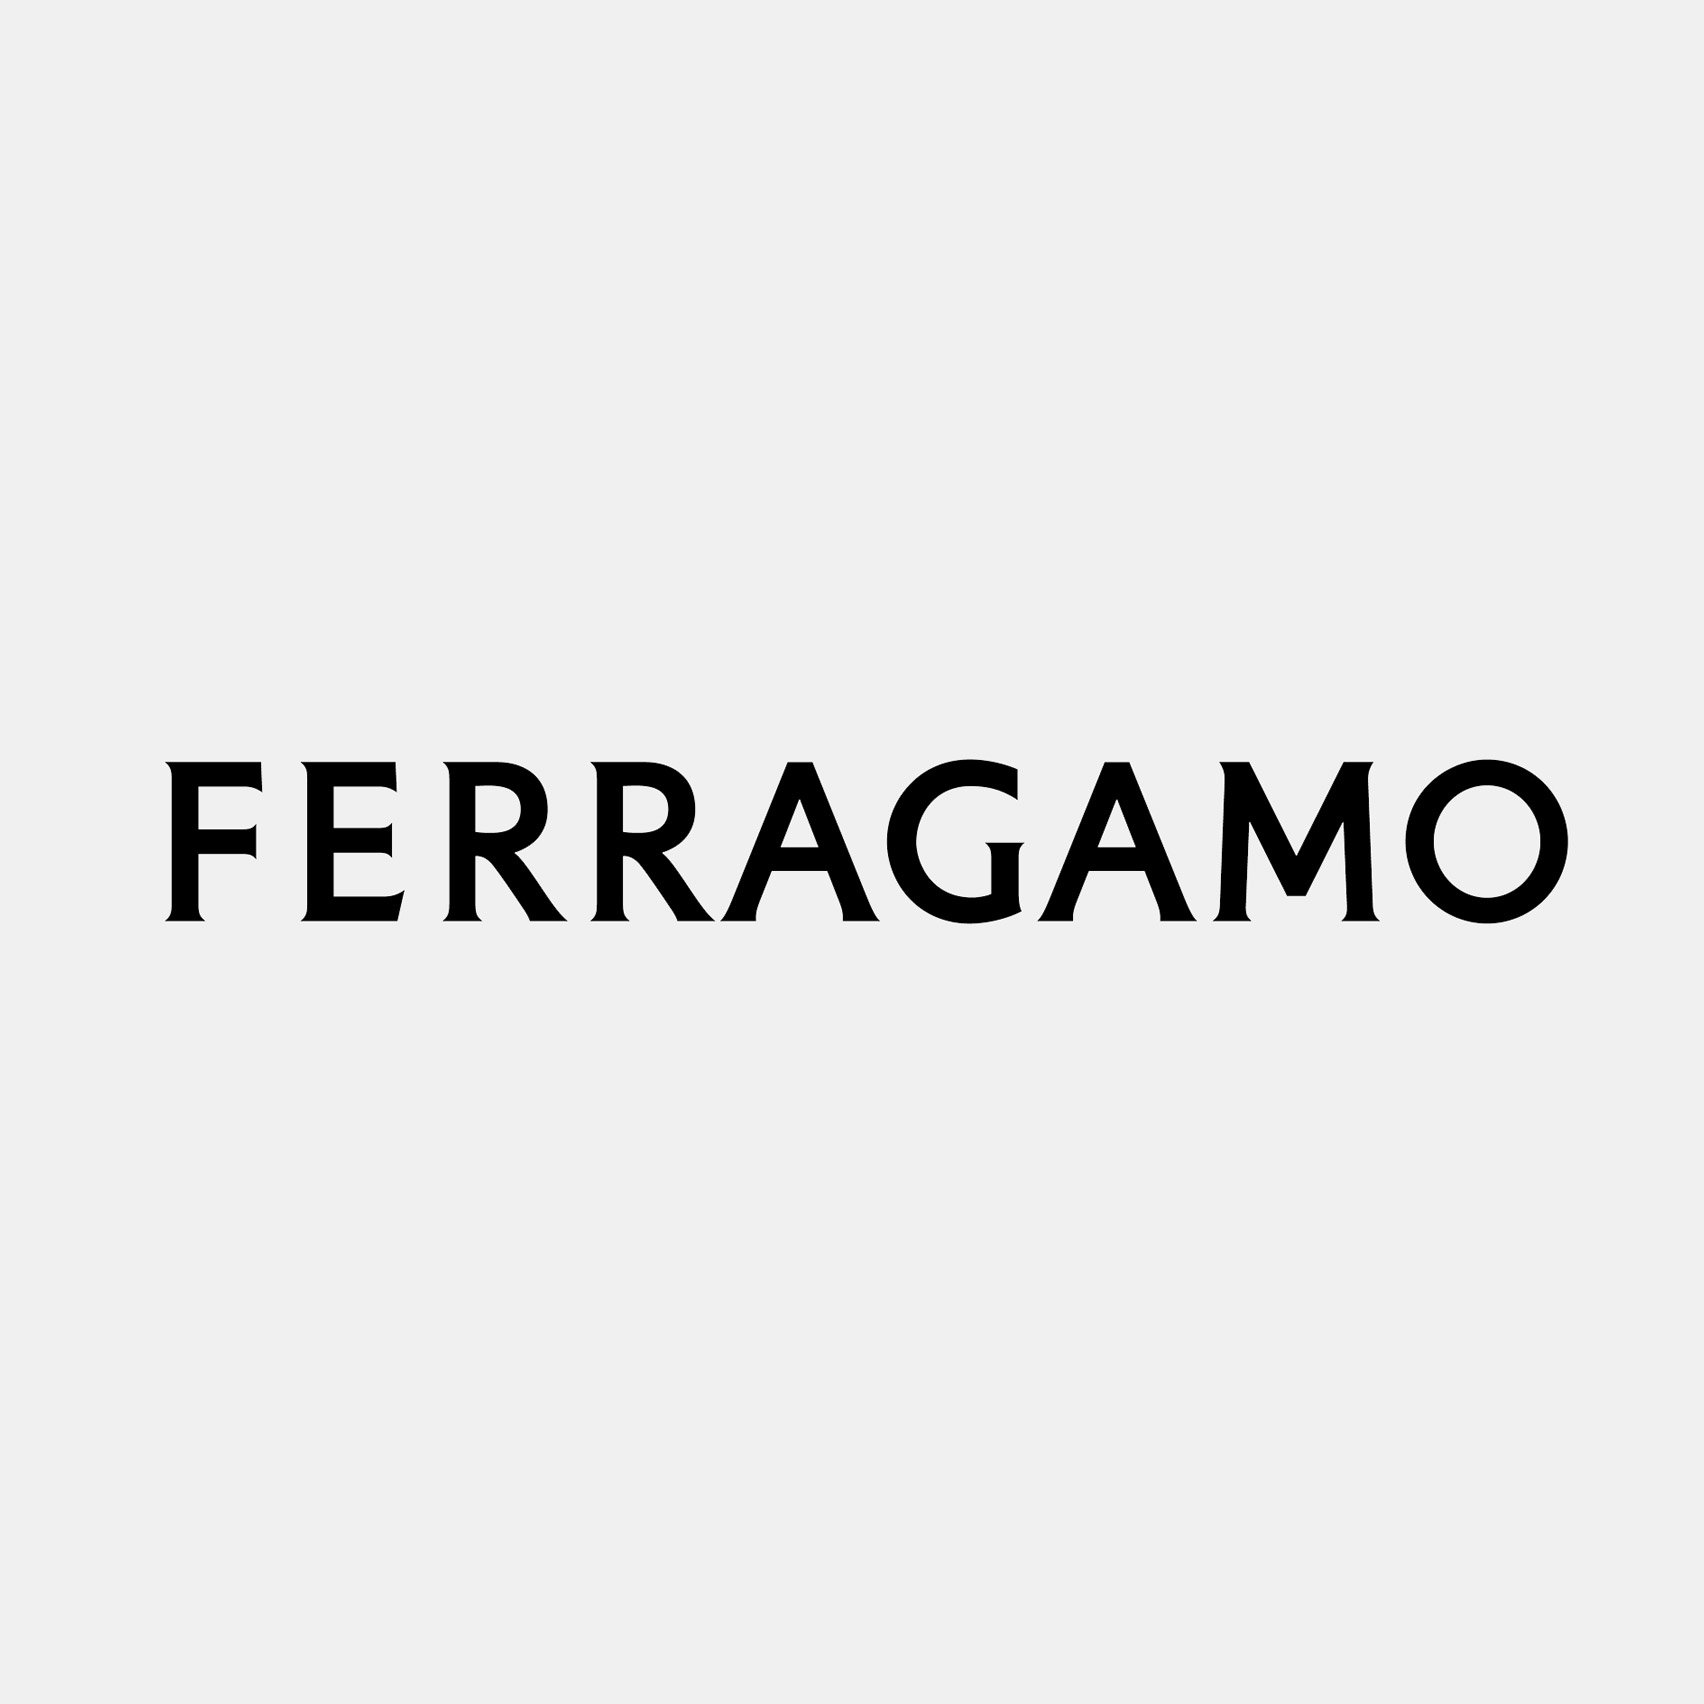 The Most Famous Italian Fashion Brands And Their Logos